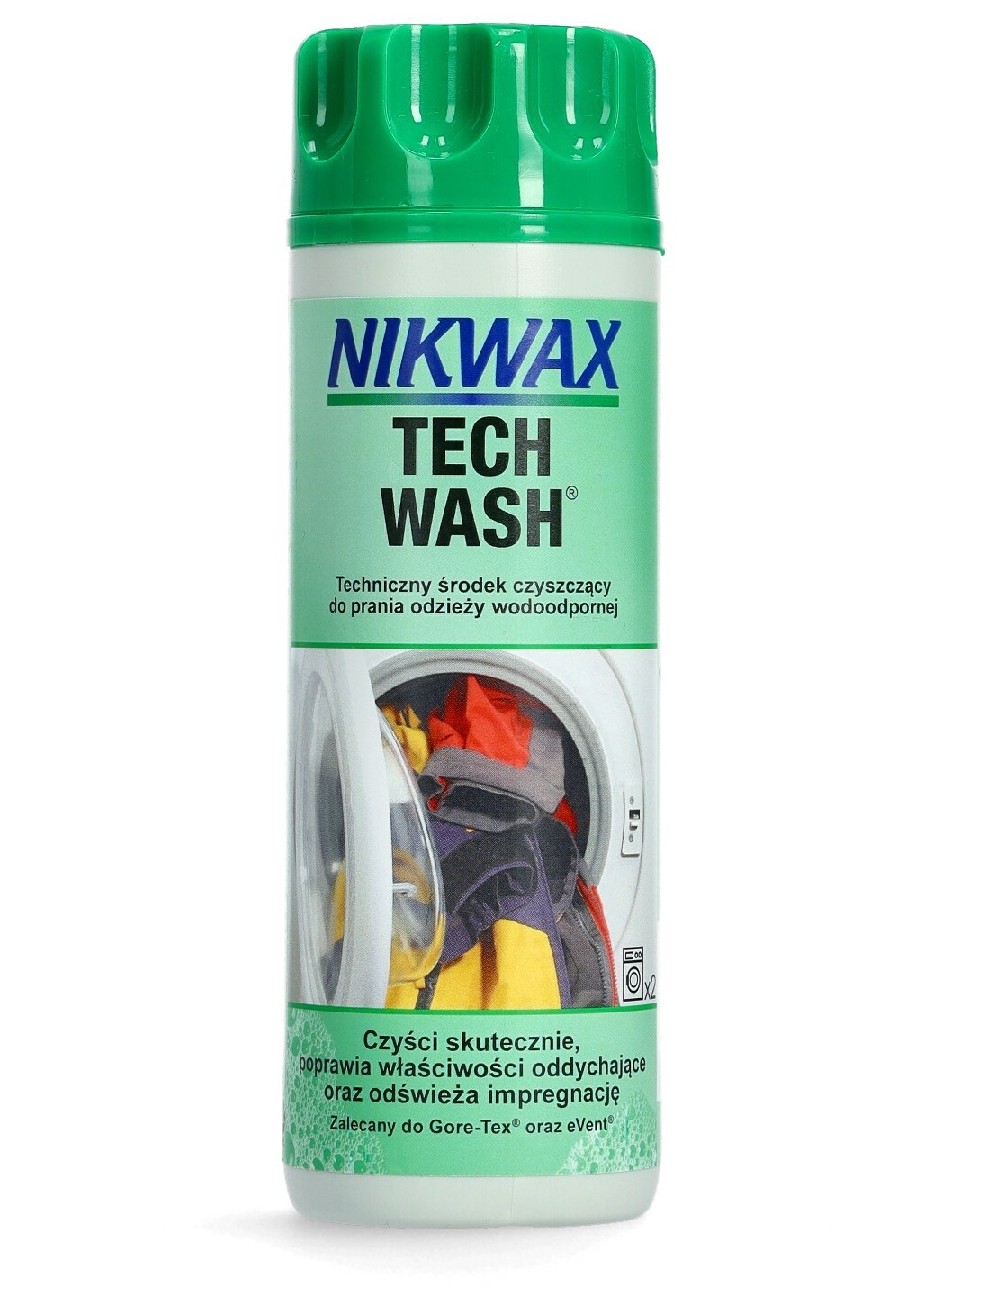 Detergent for waterproof clothing NIKWAX Tech Wash 1L